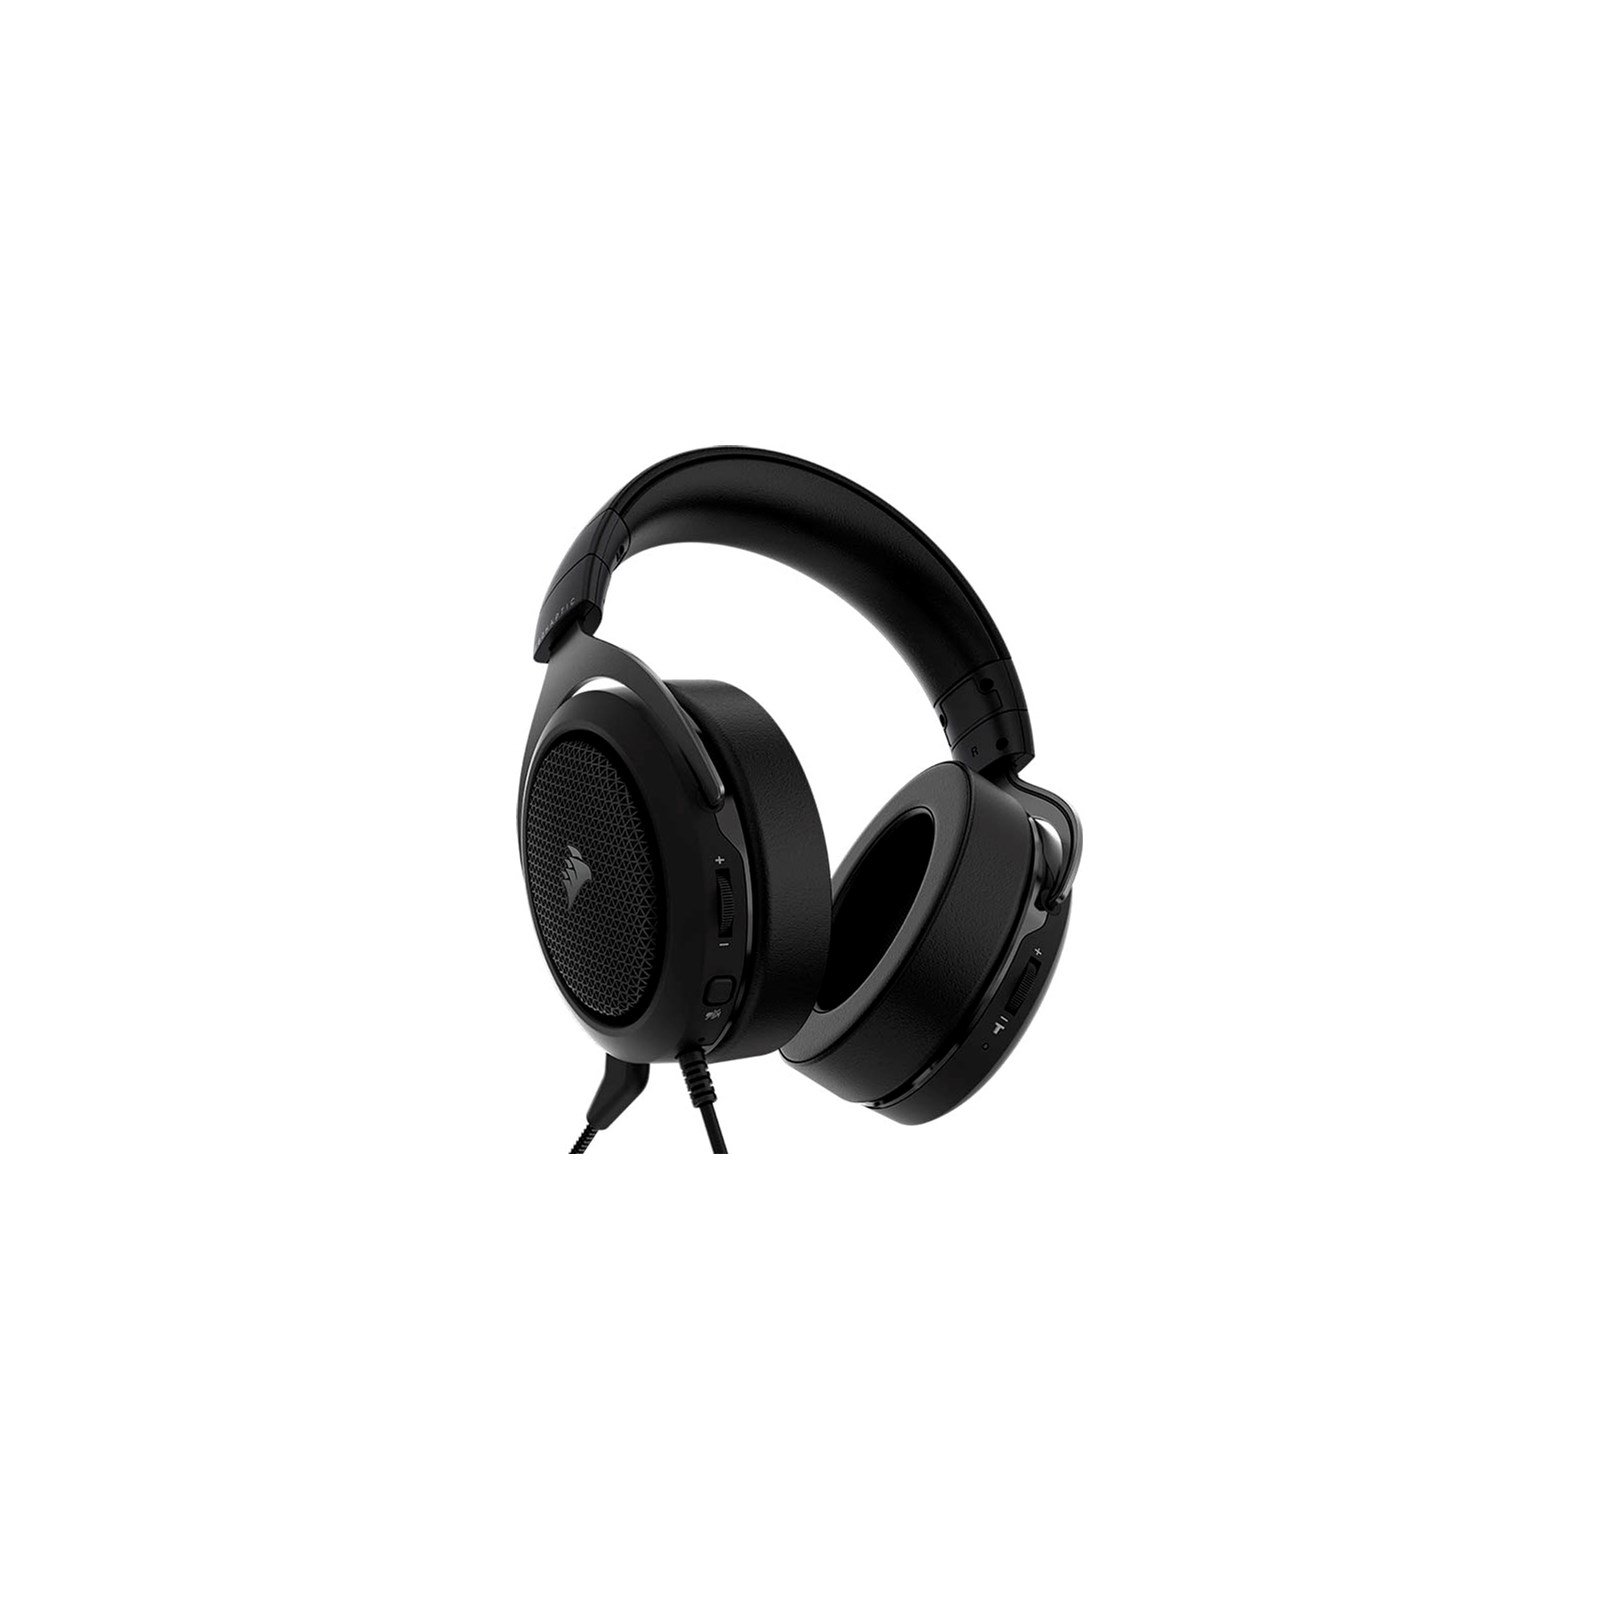 Headset HAPTIC HS60 - in | Haptic Black Stereo Bass with Gaming Corsair CCL Carbon CA-9011228-EU